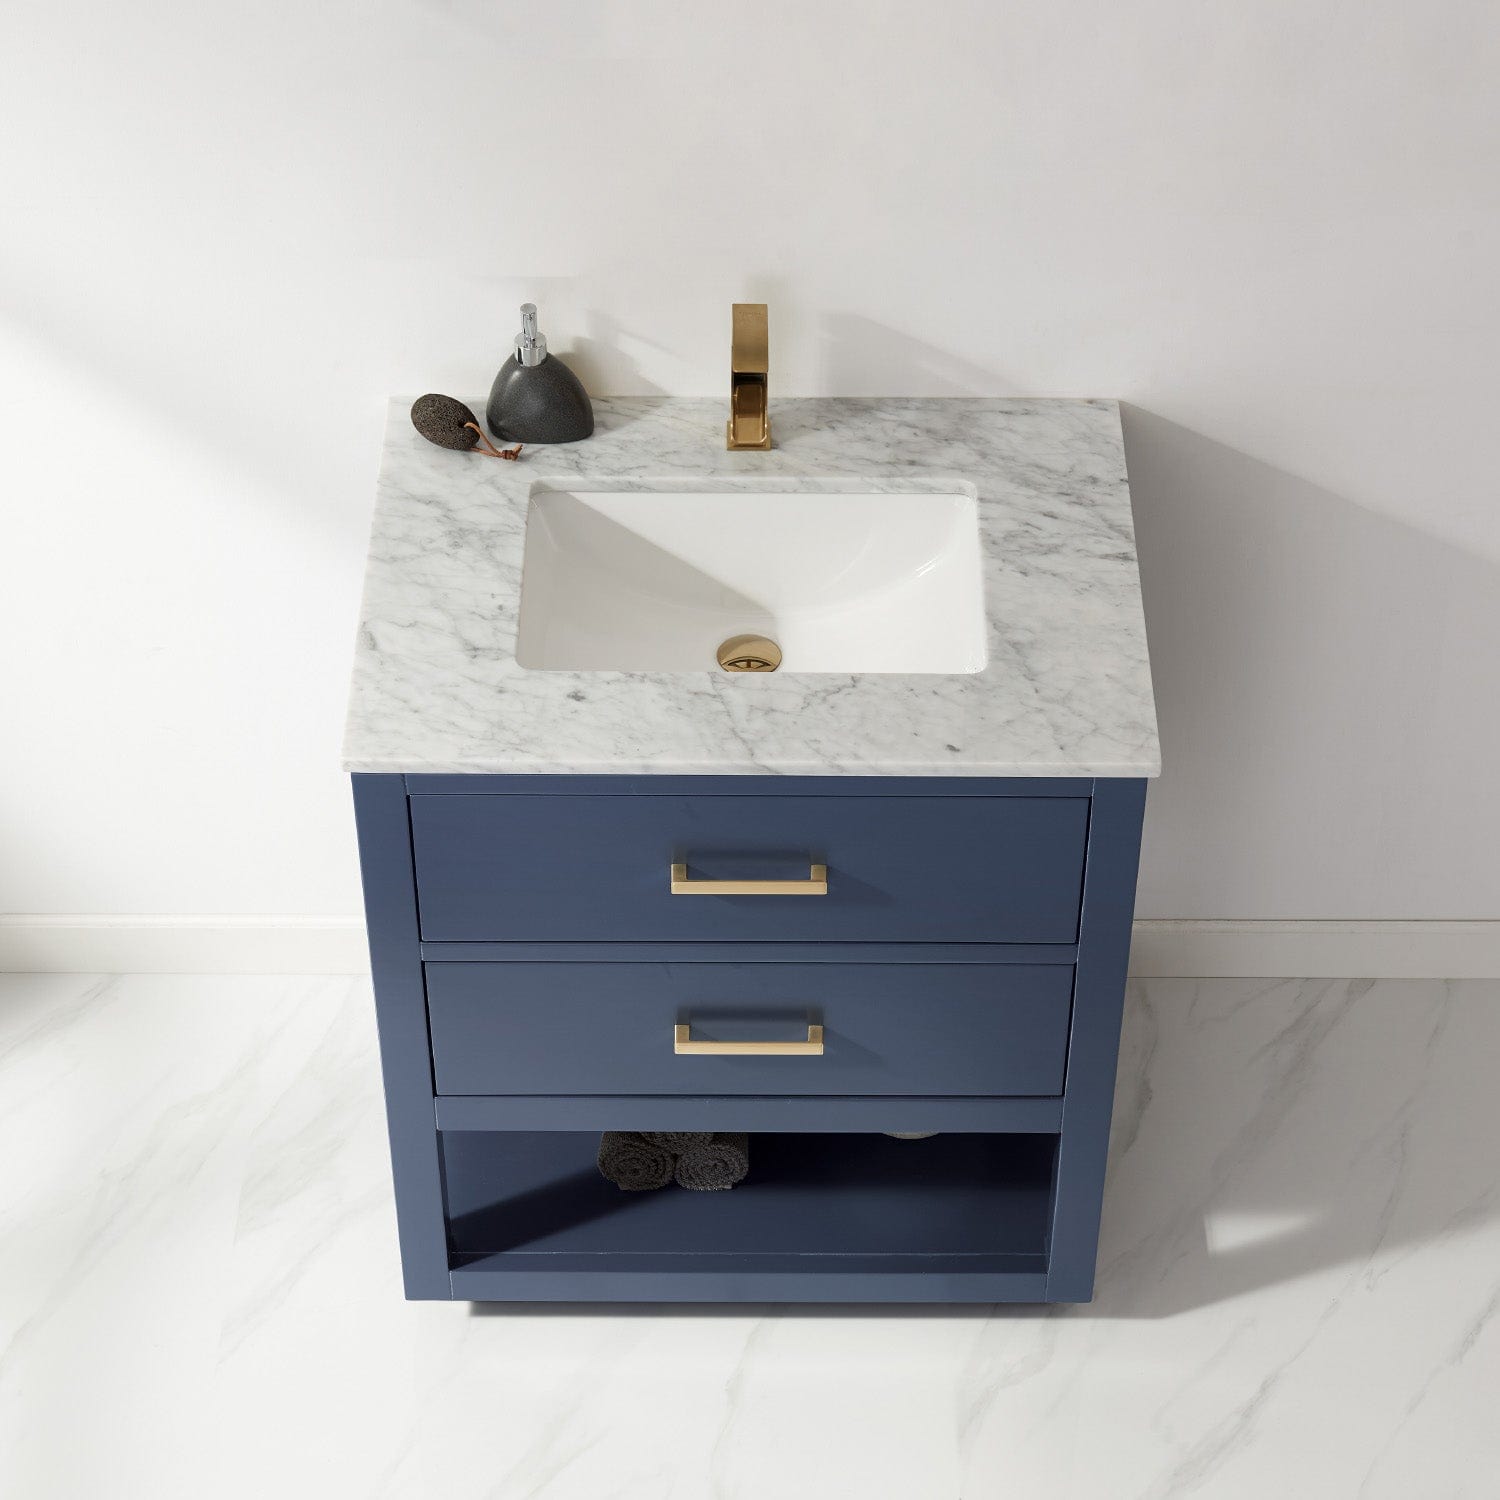 Altair Remi 30" Single Bathroom Vanity Set in Royal Blue and Carrara White Marble Countertop without Mirror 532030-RB-CA-NM - Molaix631112971362Vanity532030-RB-CA-NM